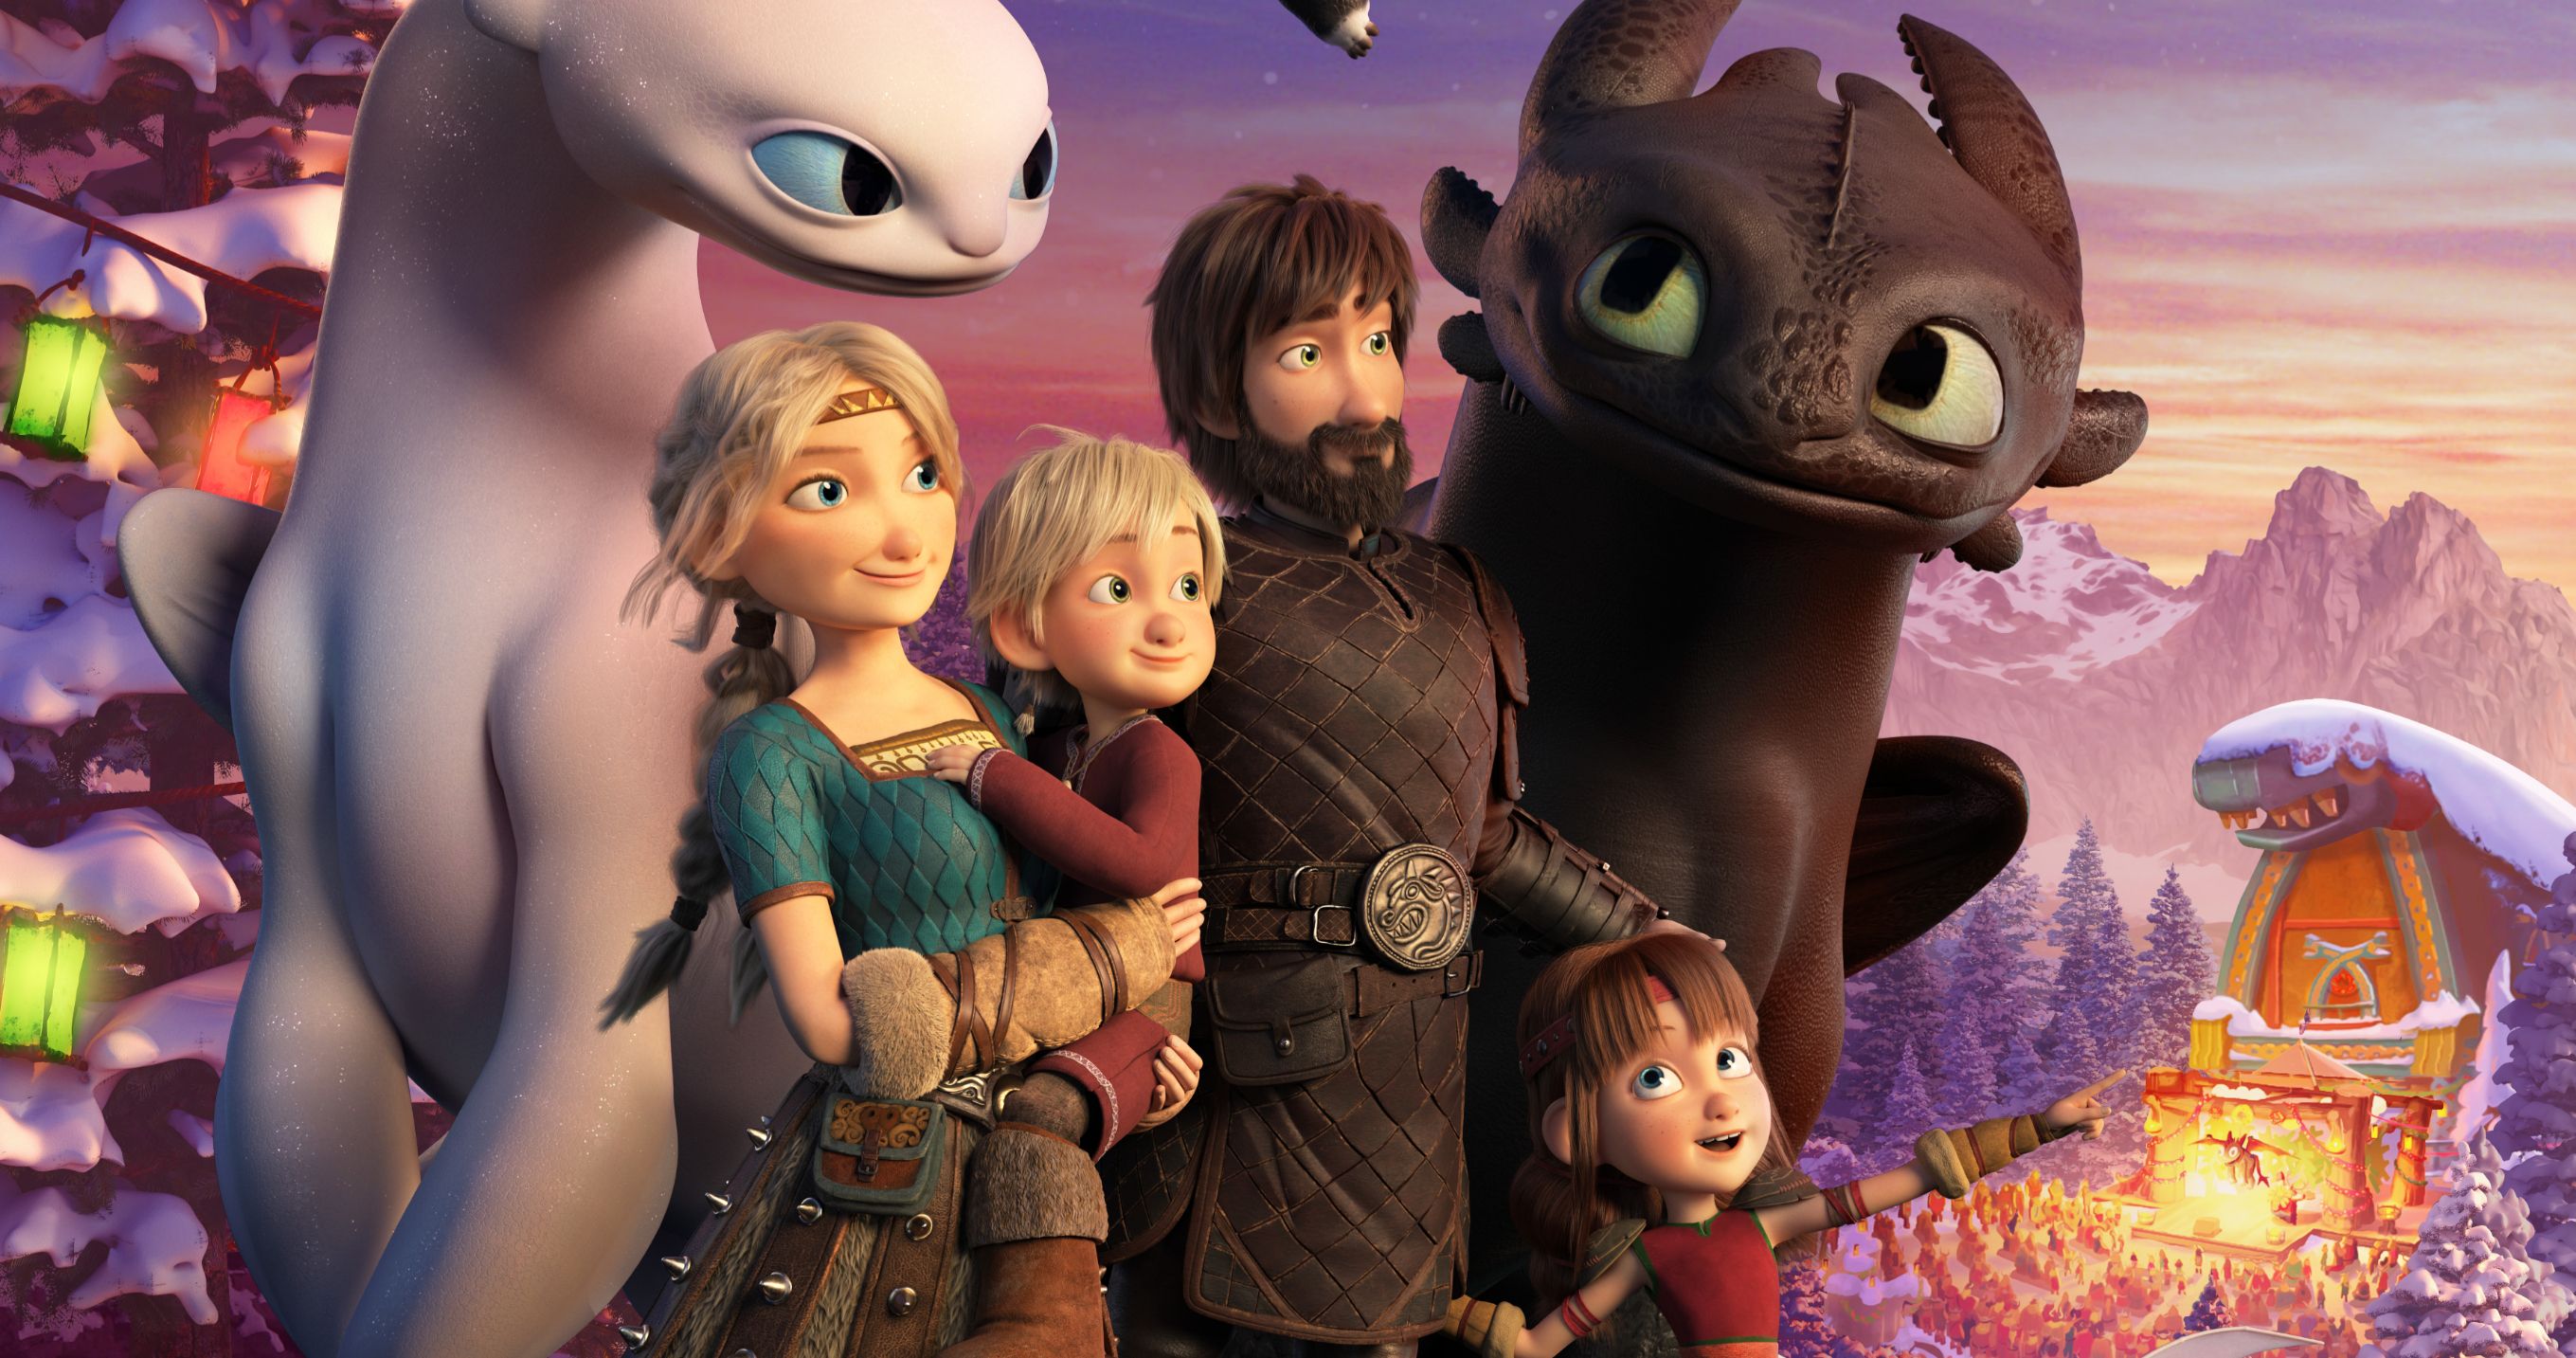 AllNew How to Train Your Dragon Holiday Special Arrives in December